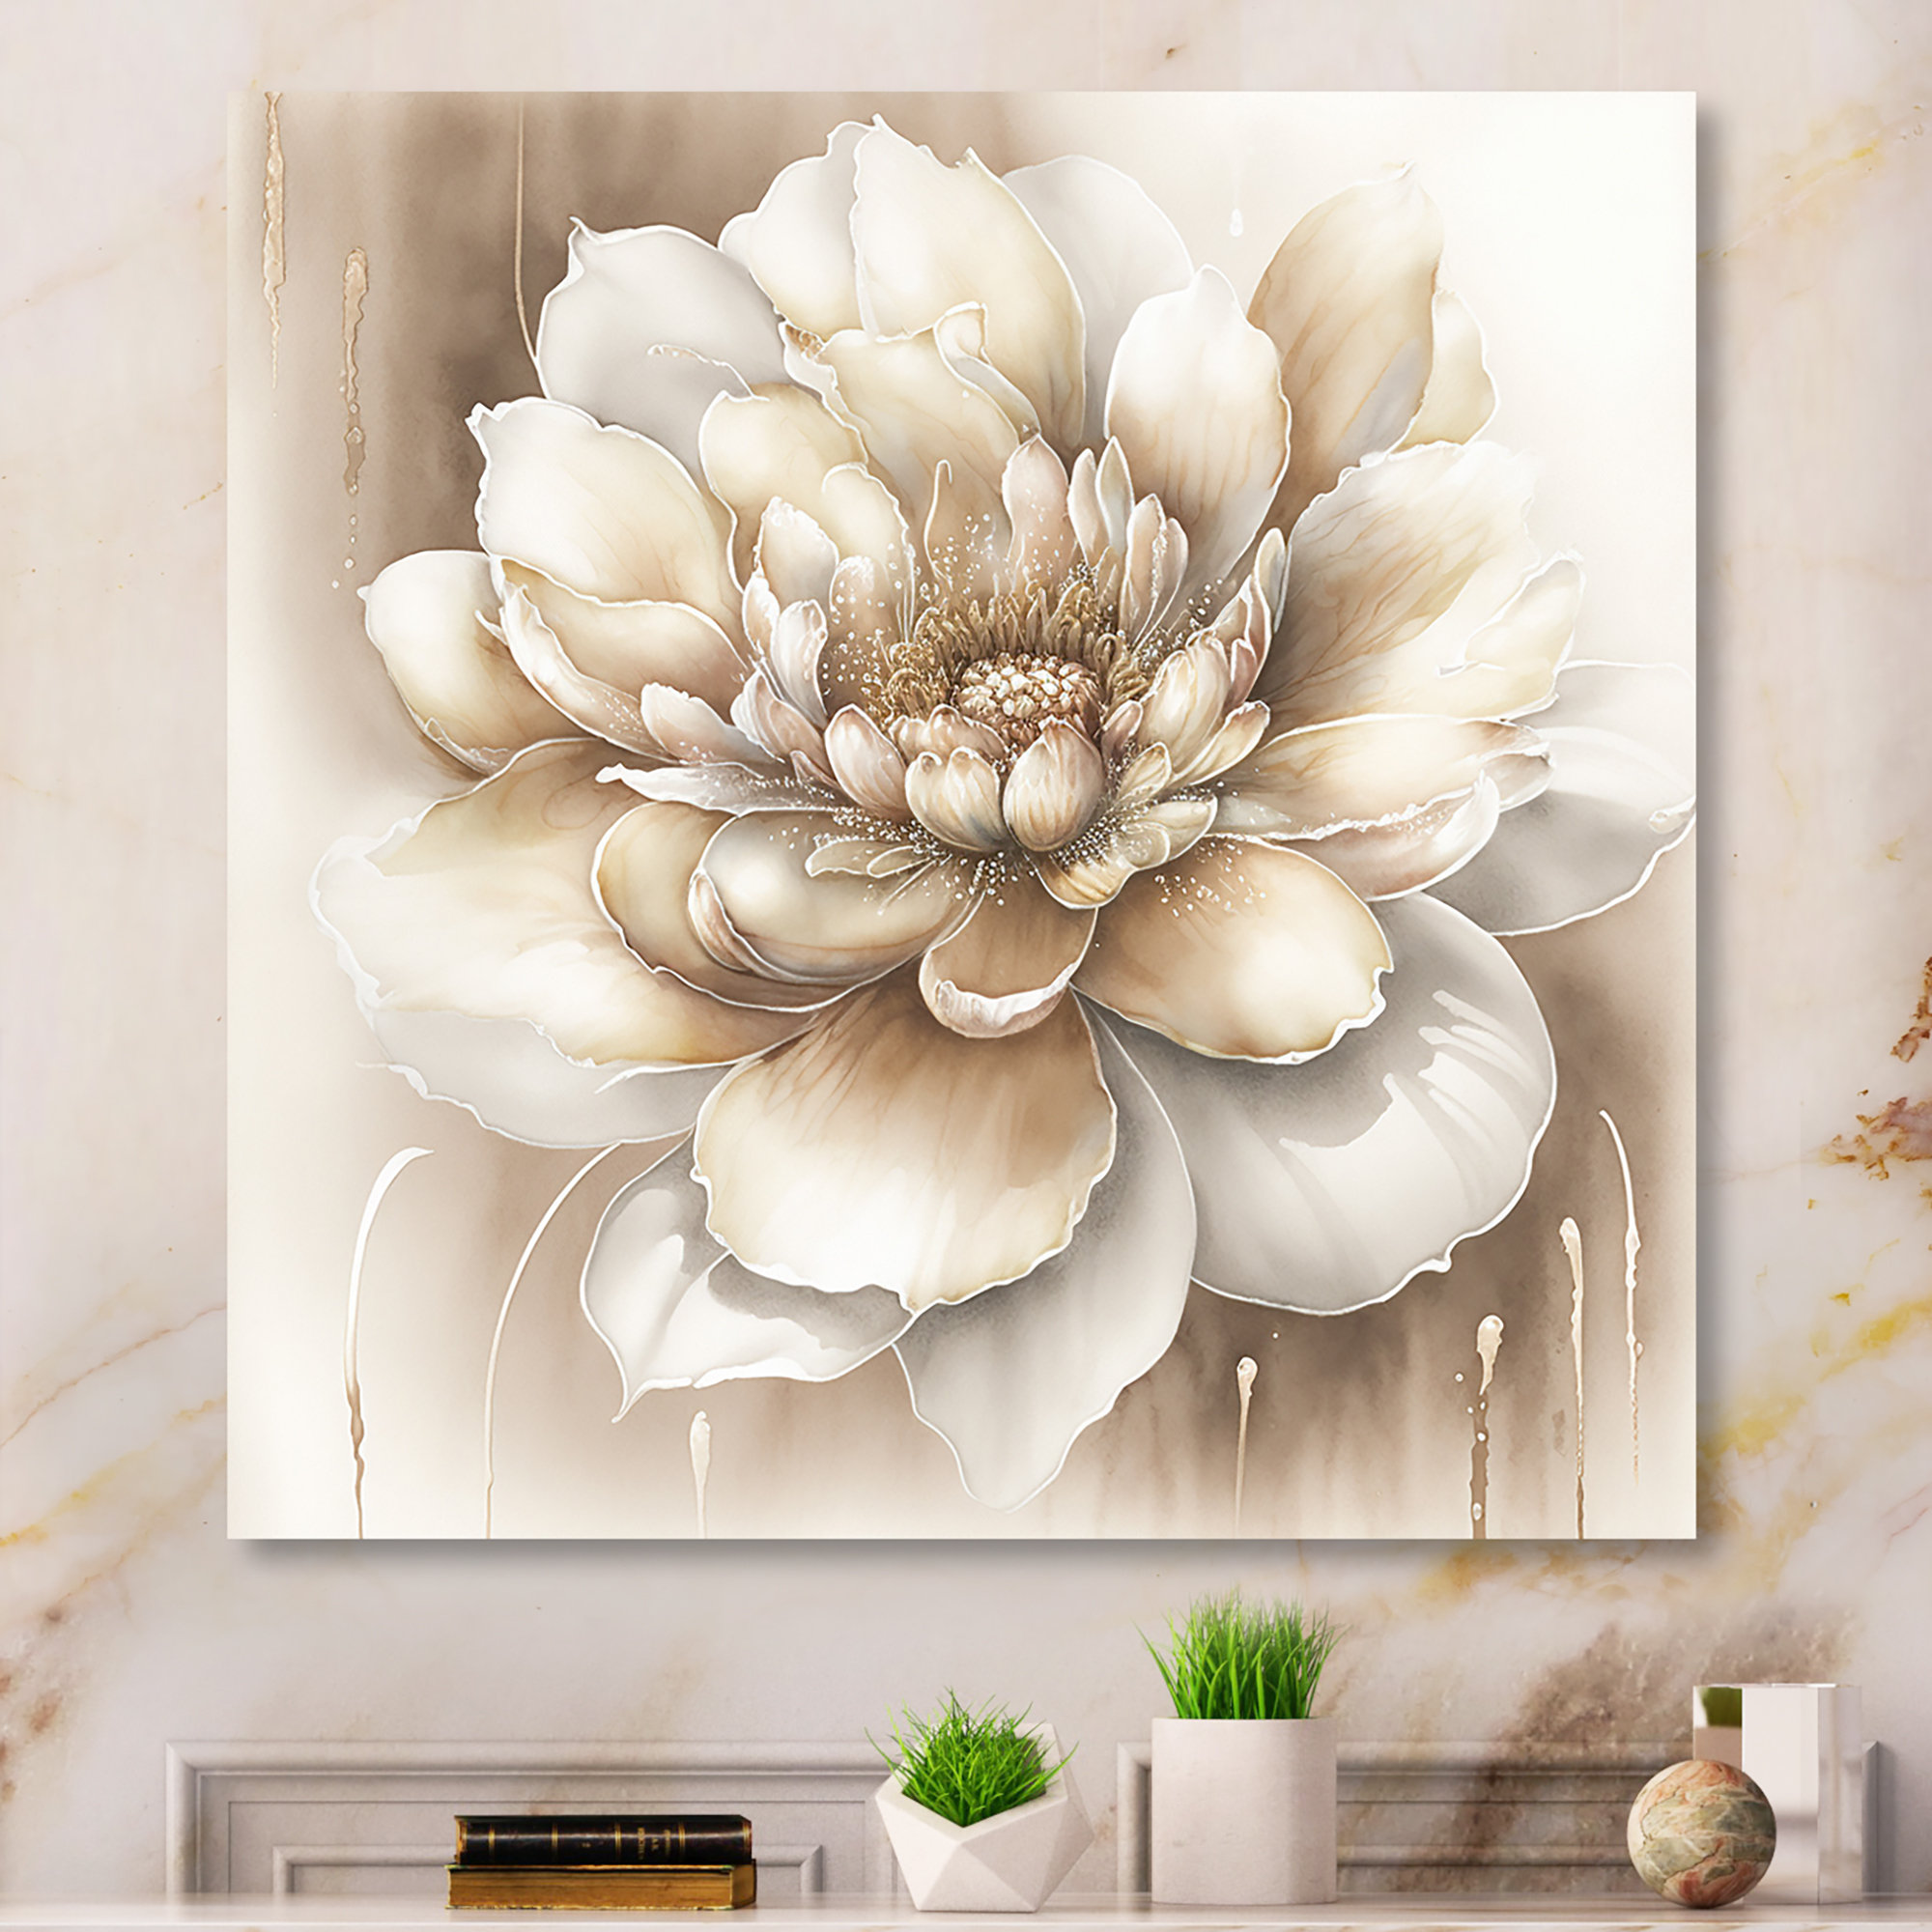 Sculpted Rose Canvas Art in Custom Colors to Match Nursery, Small